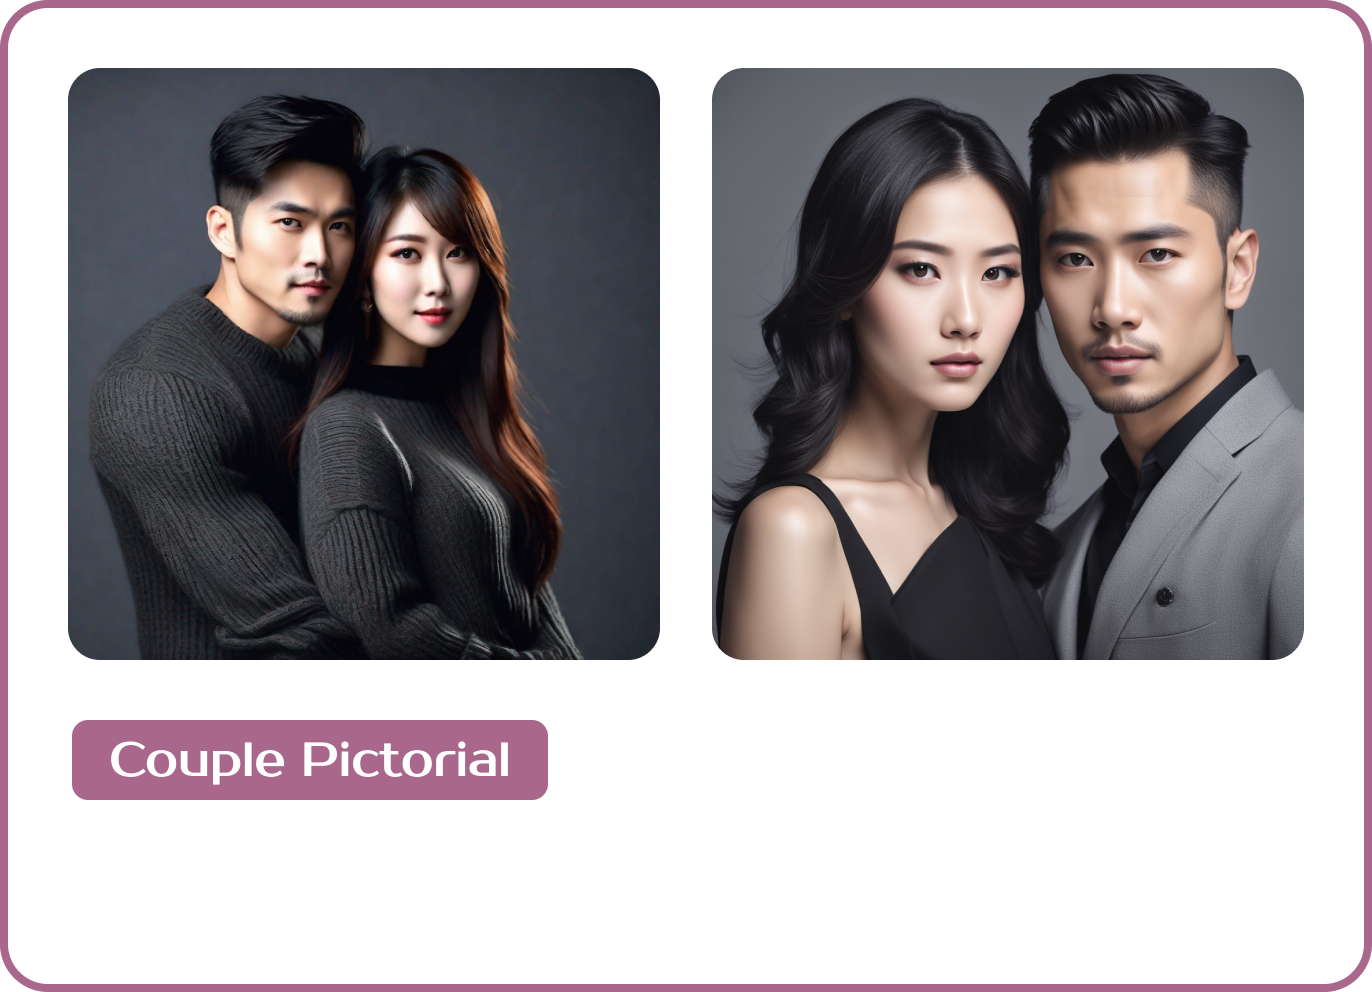 Couple Pictorial theme image